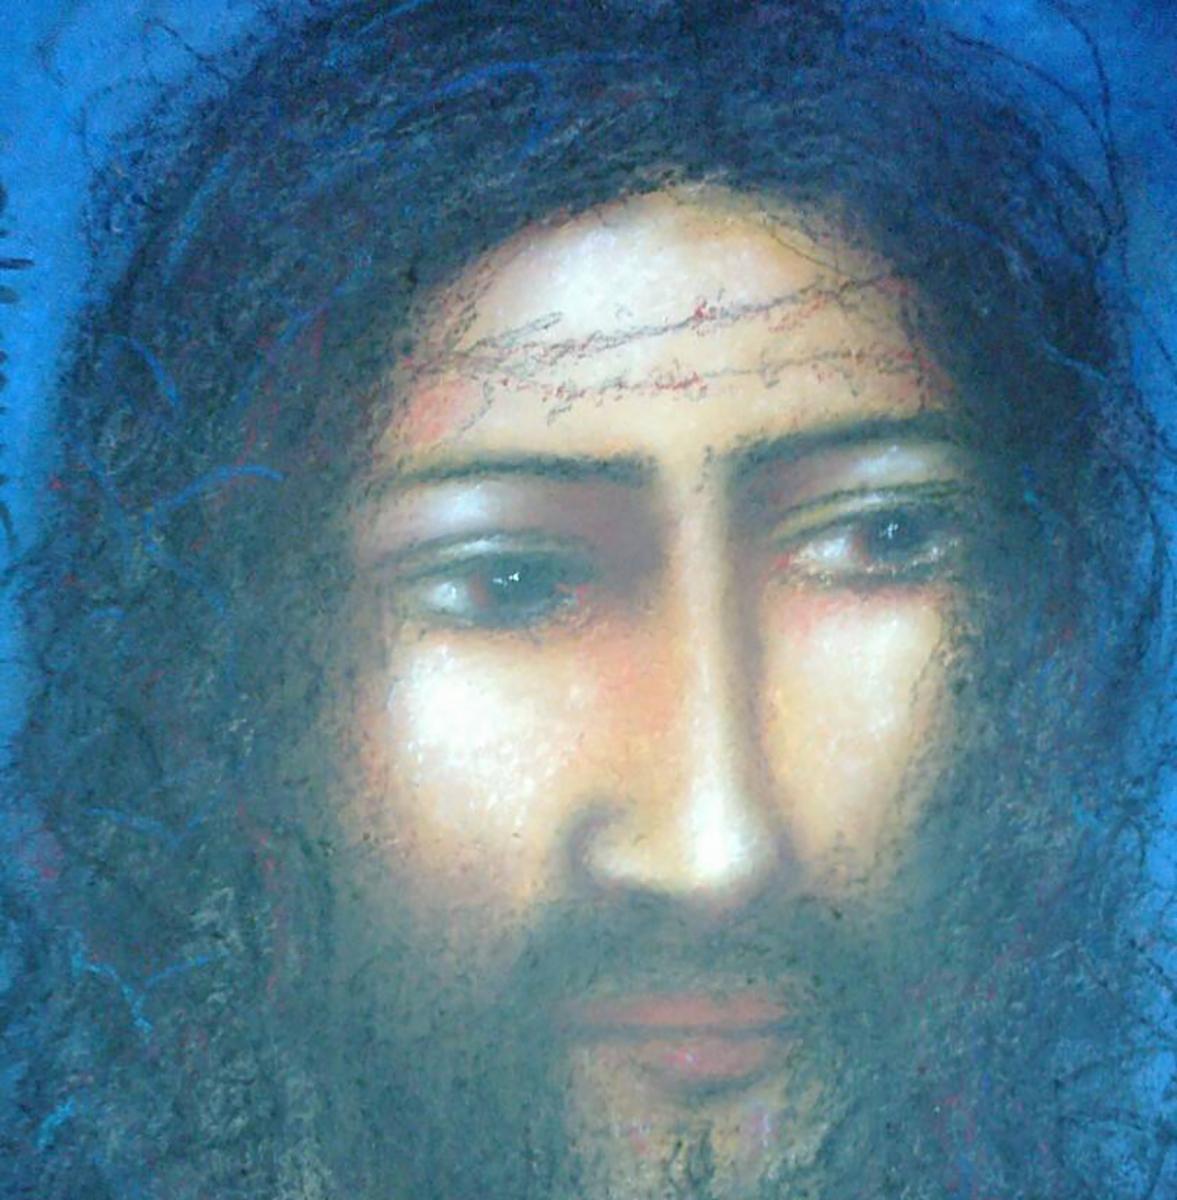 Christ II, Symbolic of the Pain & Torture, Mixed Media on paper, Blue 